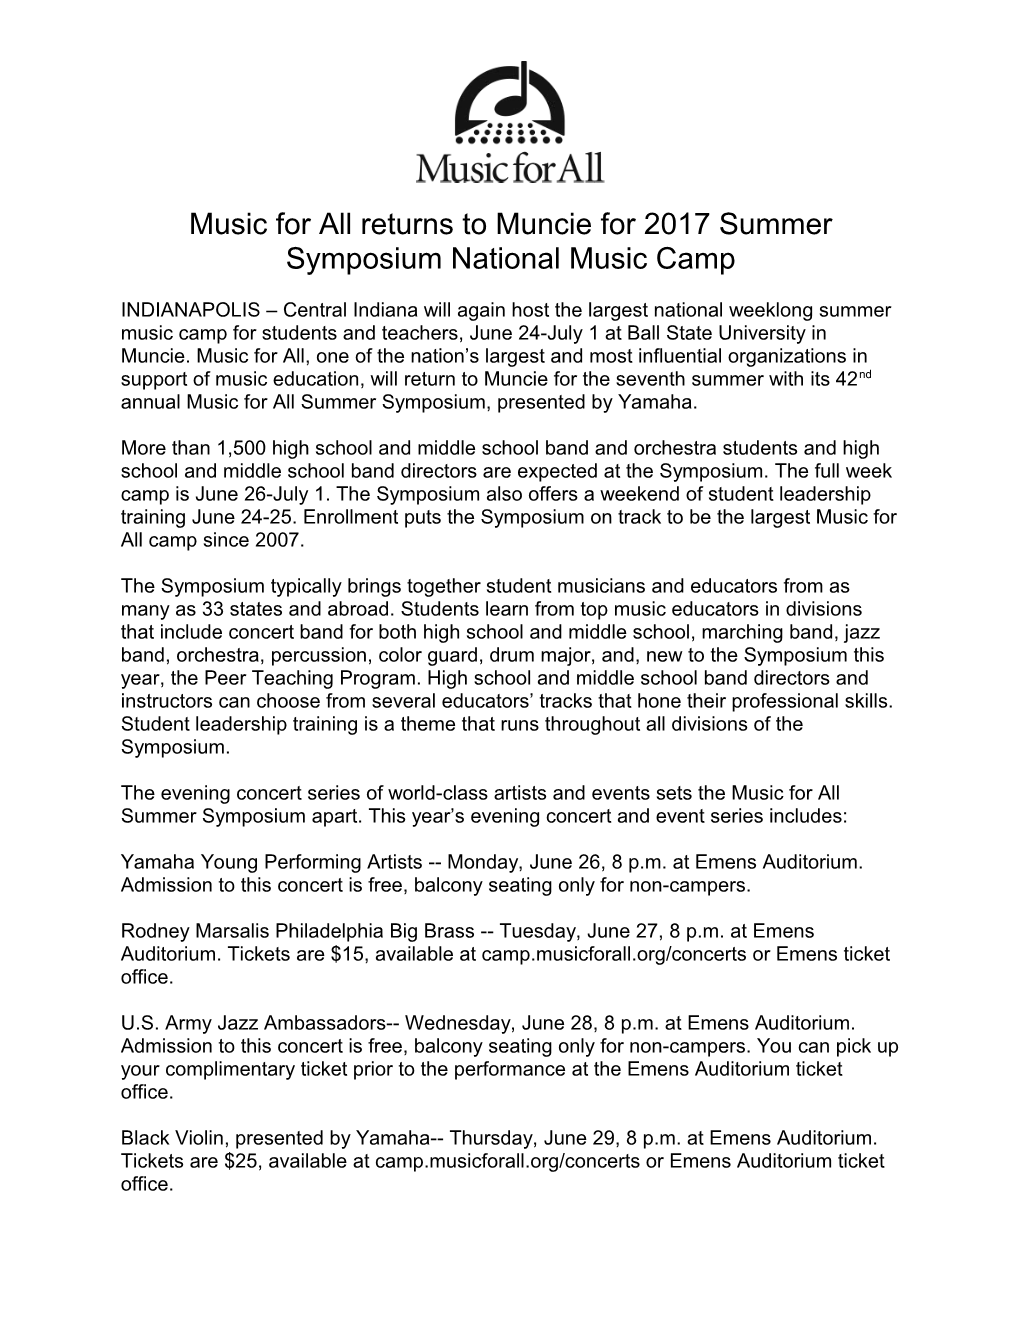 Music for All Returns to Muncie for 2017 Summer Symposium National Music Camp